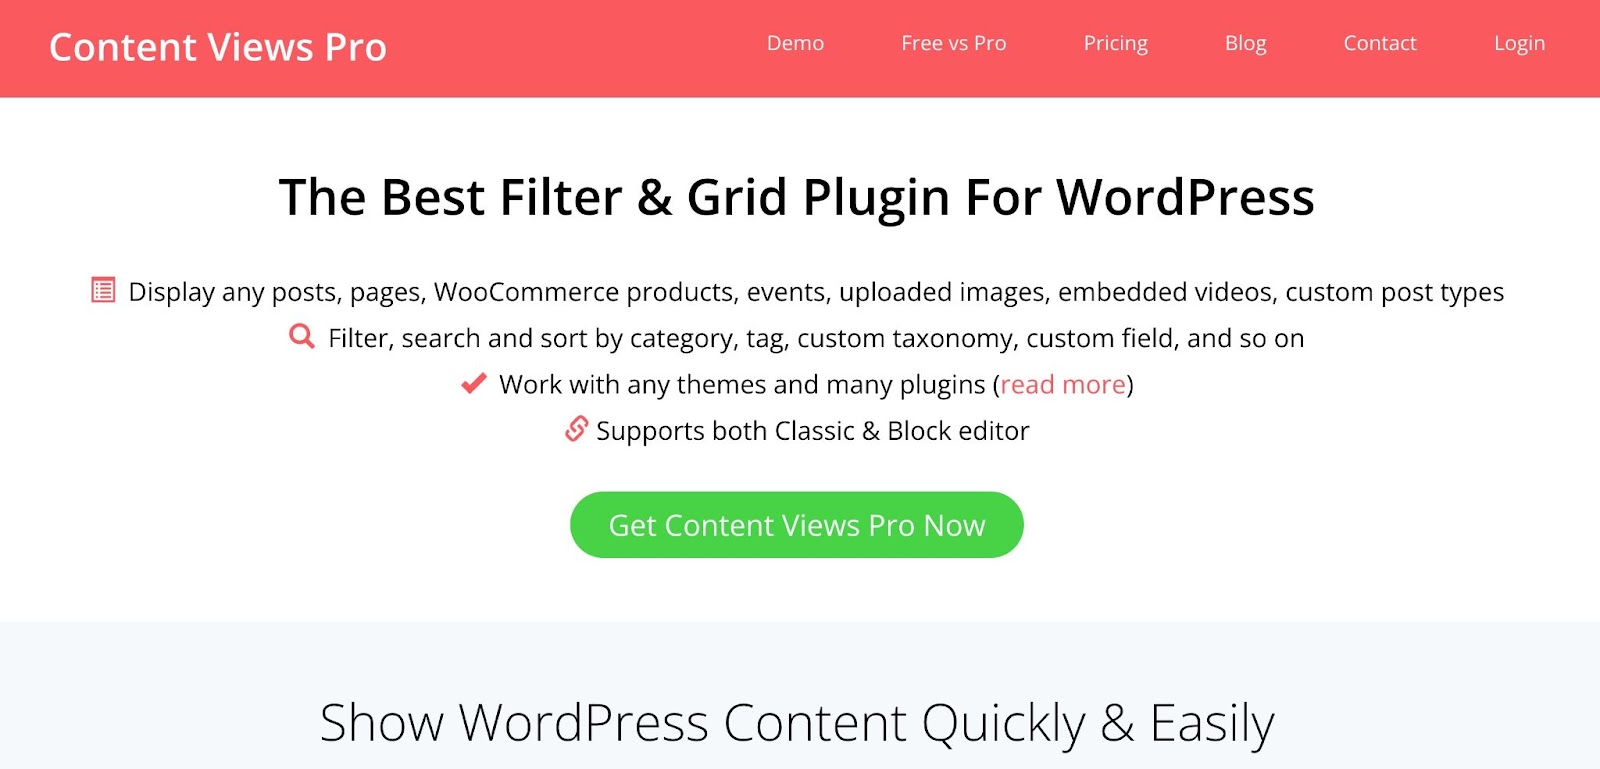 WordPress filter plugin, example from Content Views